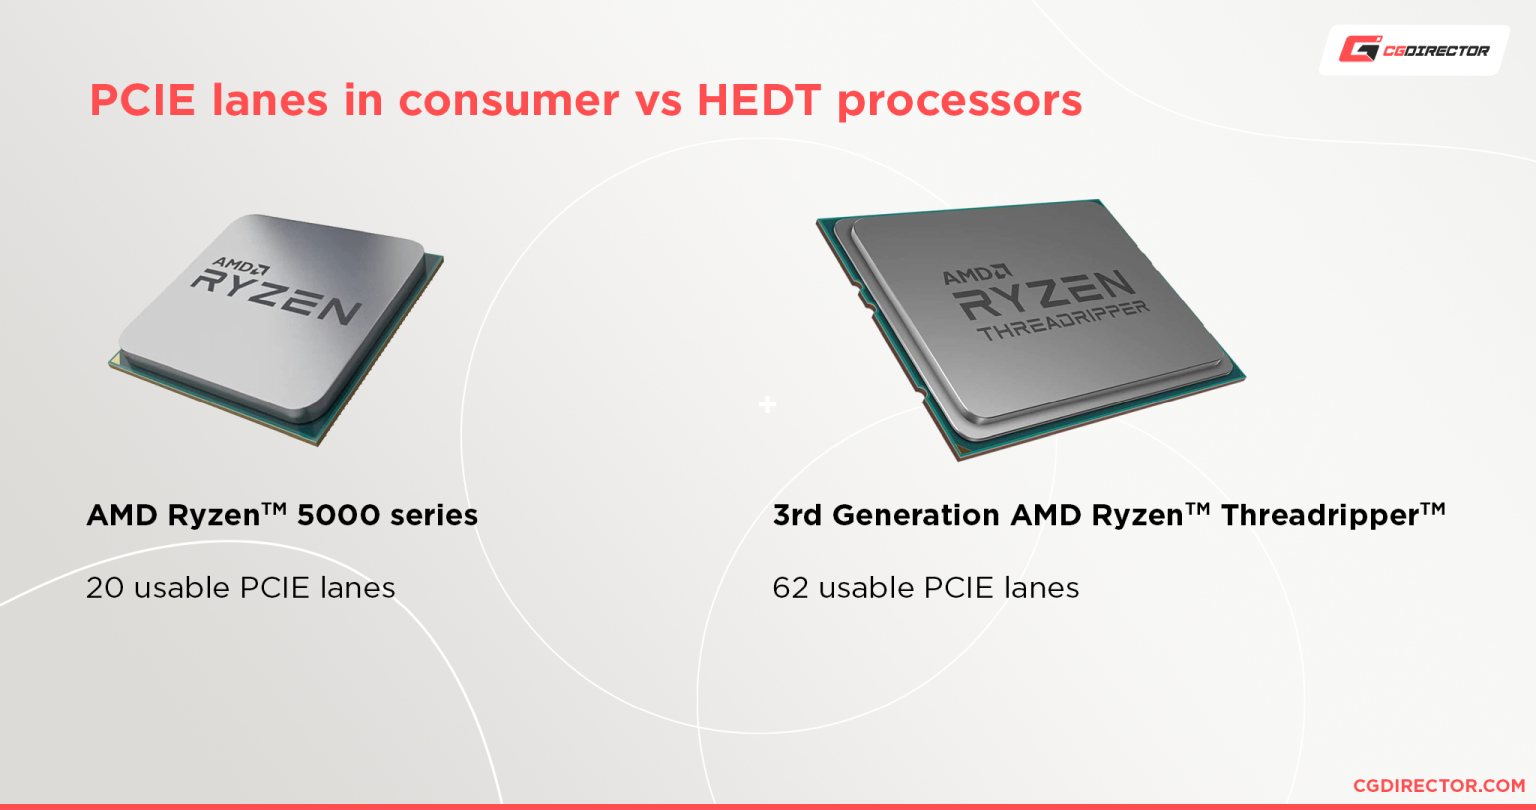 PCIE lanes in consumer vs HEDT processors